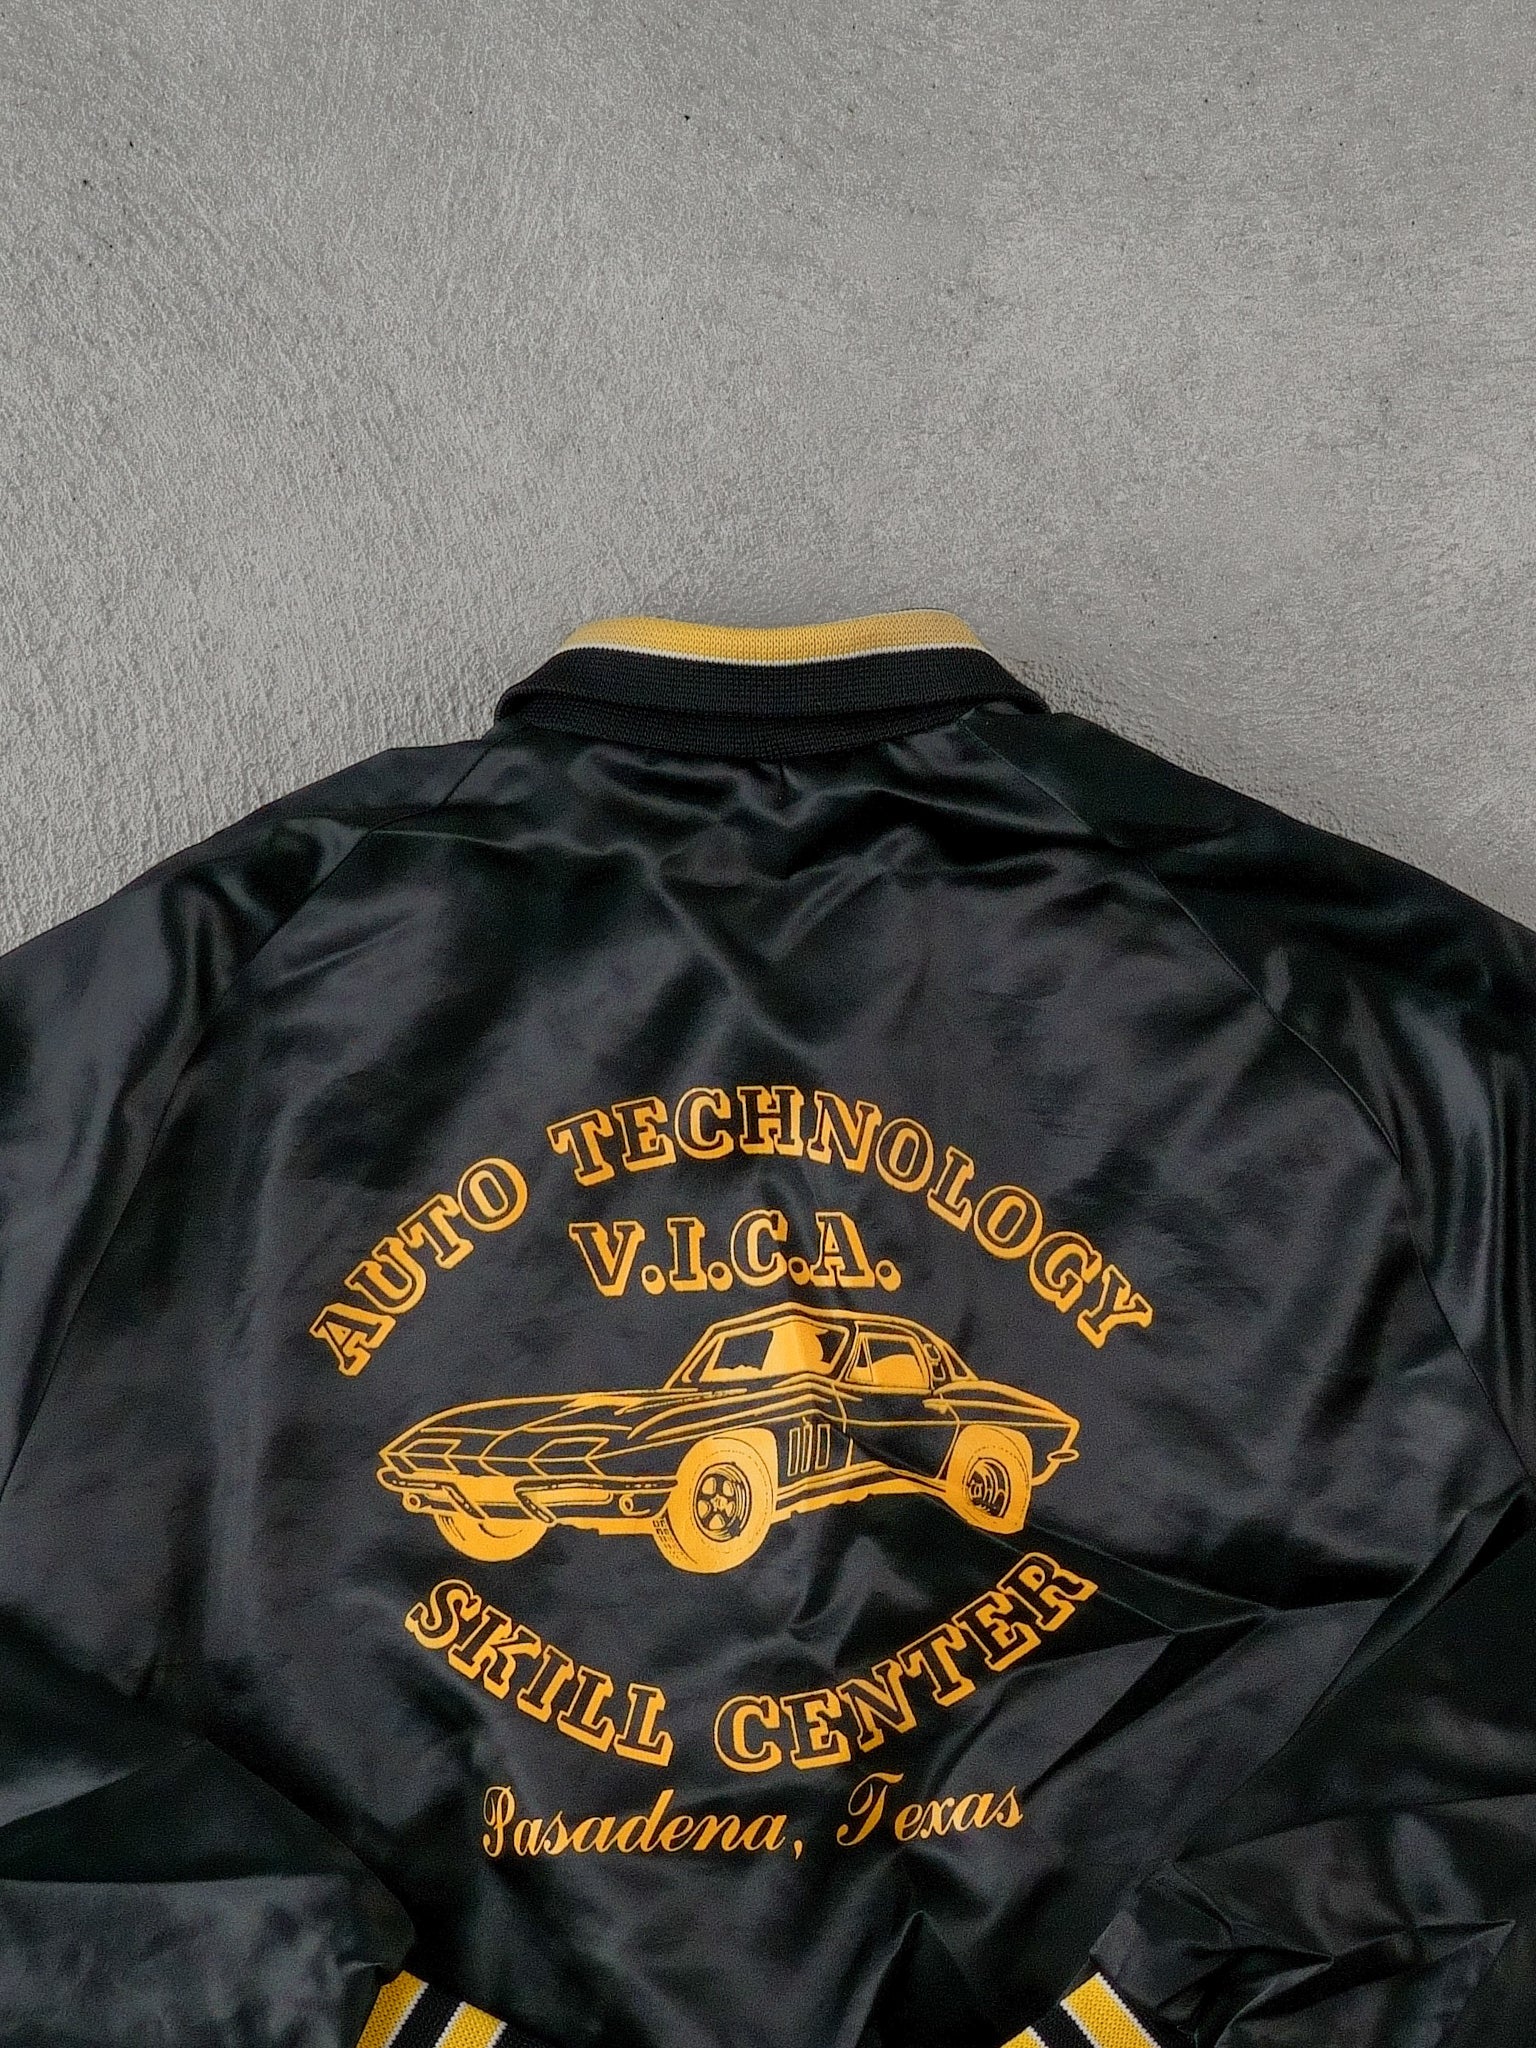 Vintage 90s Black and Yellow Auto Technology Skill Centre Texas Bomber Jacket (S/M)